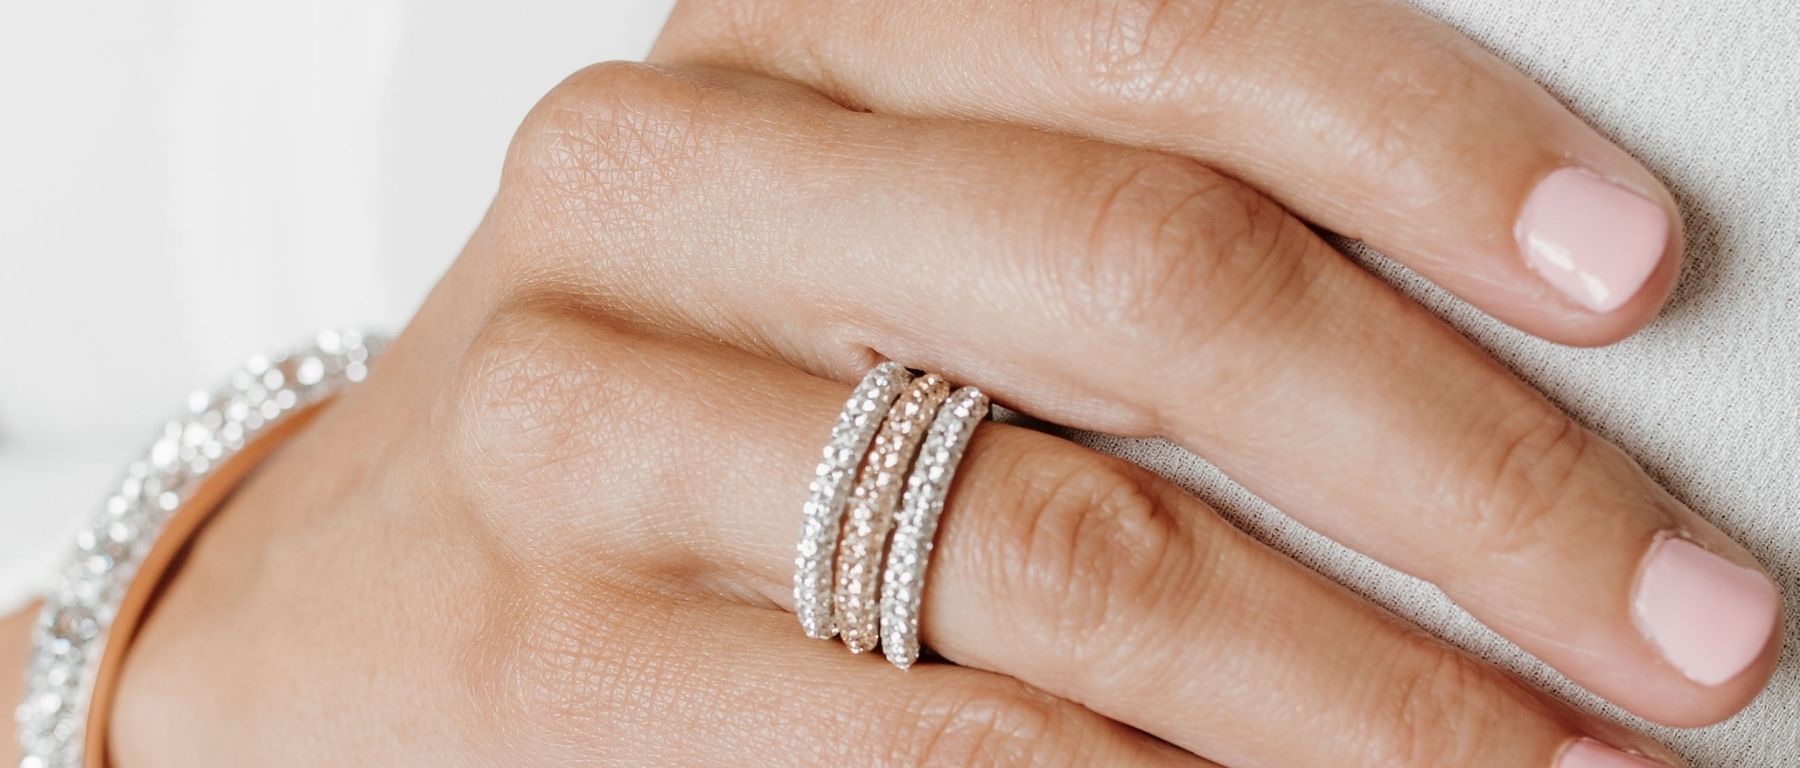 Wearing A Silver Ring In Your Little Finger Can Do Wonders In Your Life,  Know How? | Silver pinky ring, How to wear rings, Ring finger meaning